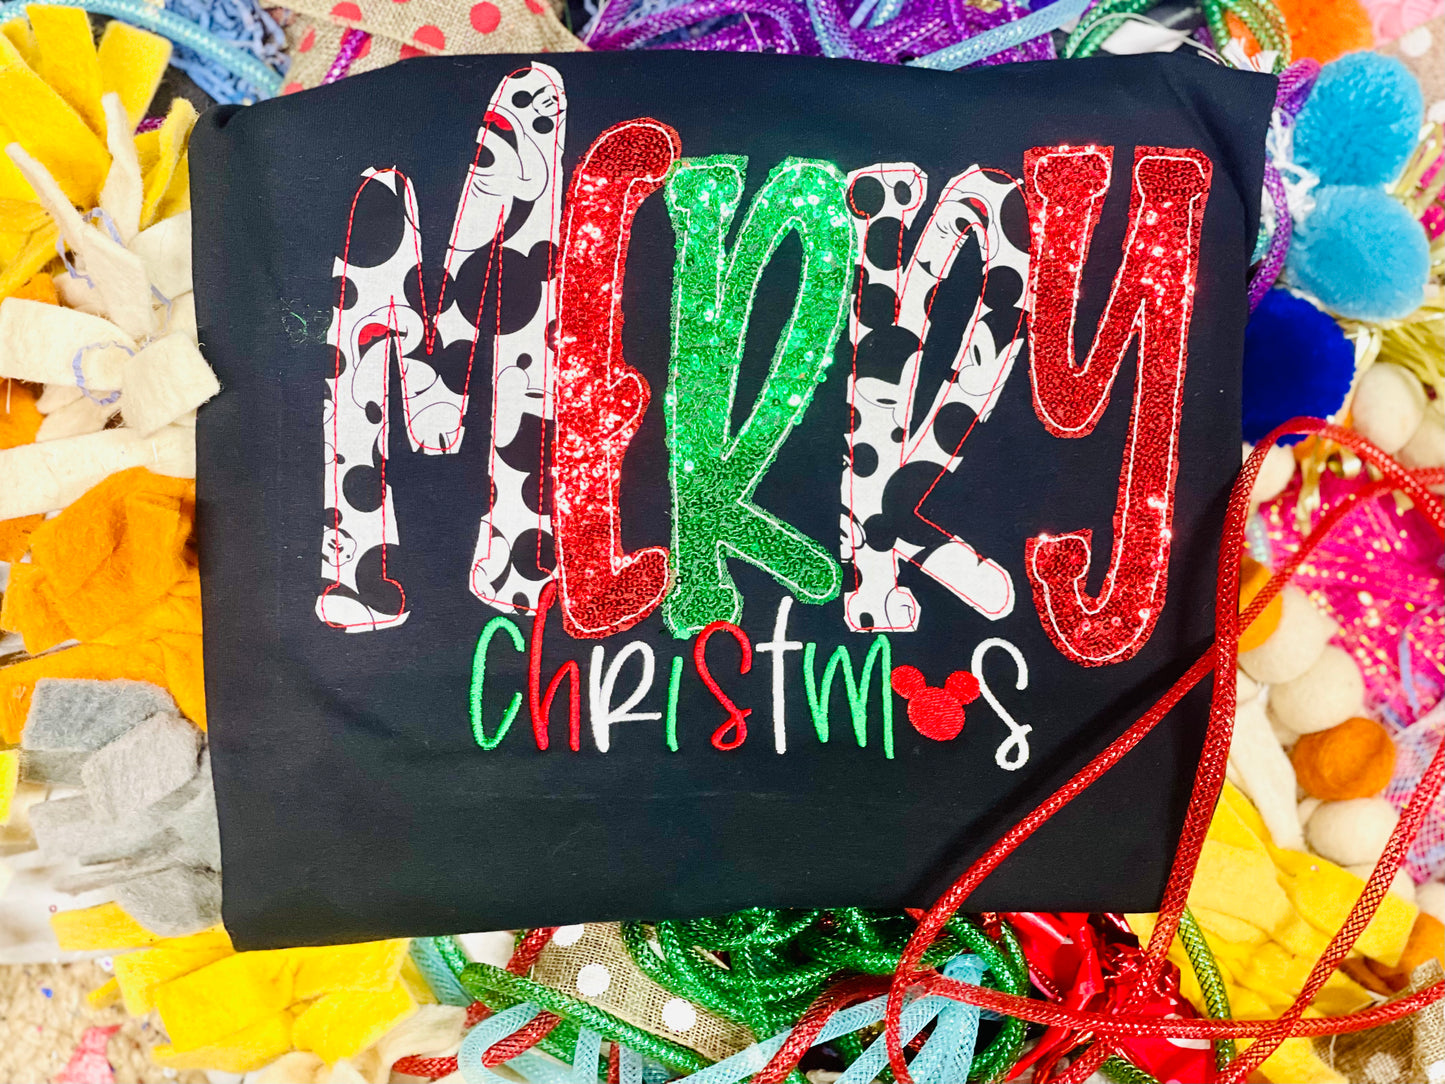 Embroidered Merry Christmas Tee/Sweatshirt with Sequin Fabric!